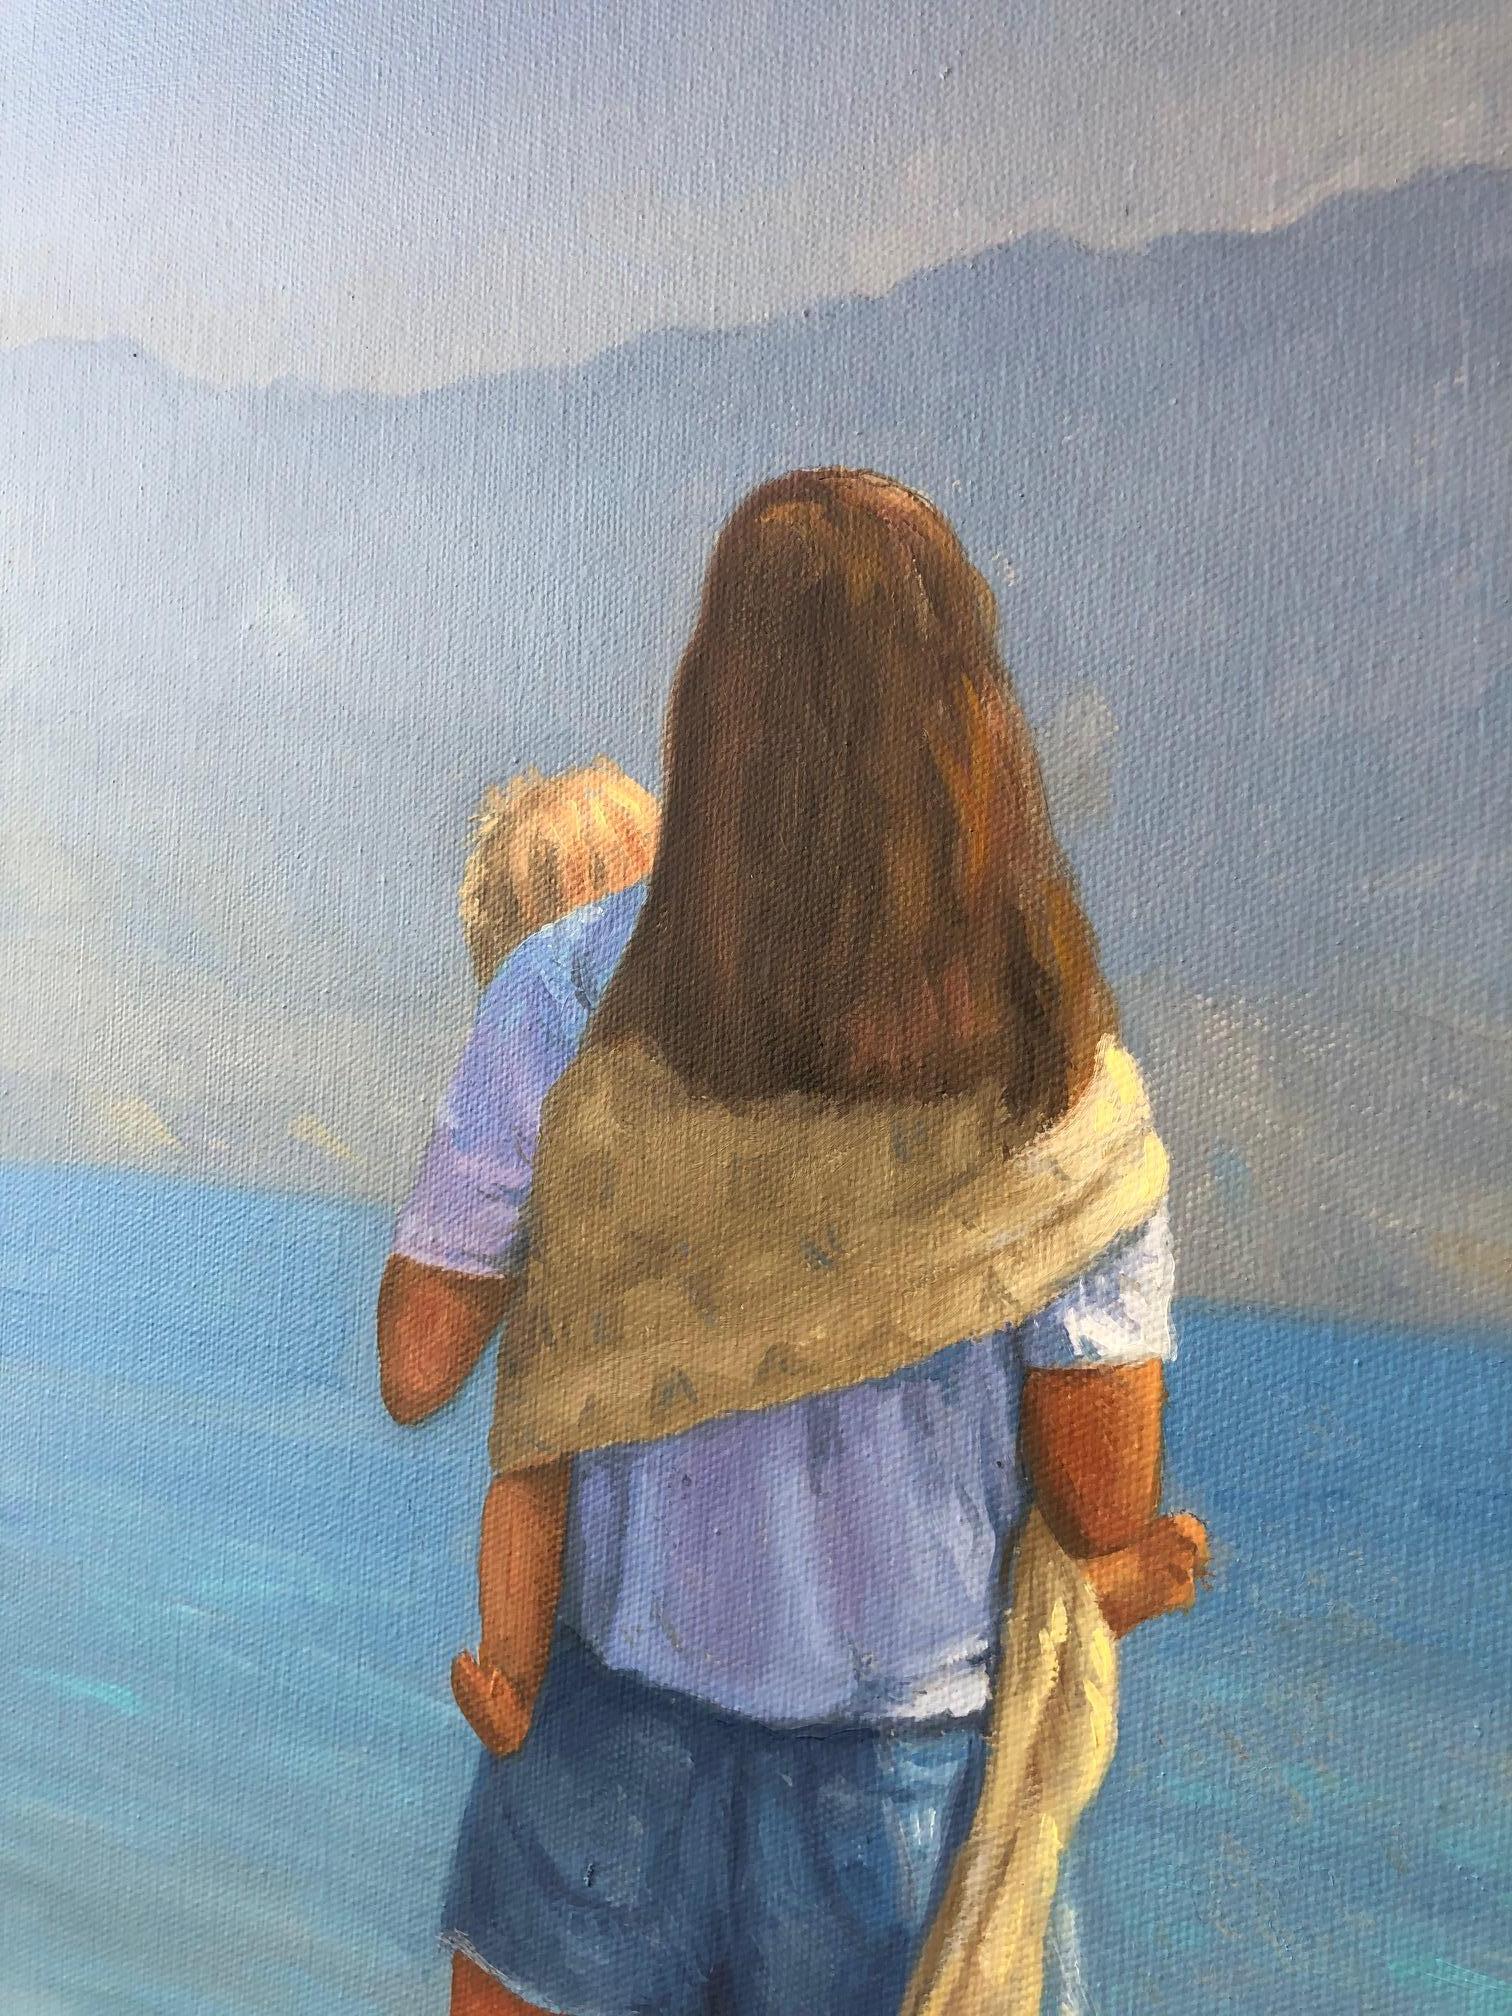 MOTHER AND CHILD - realism family baby seascape nursery painting - Realist Painting by Willard Dixon